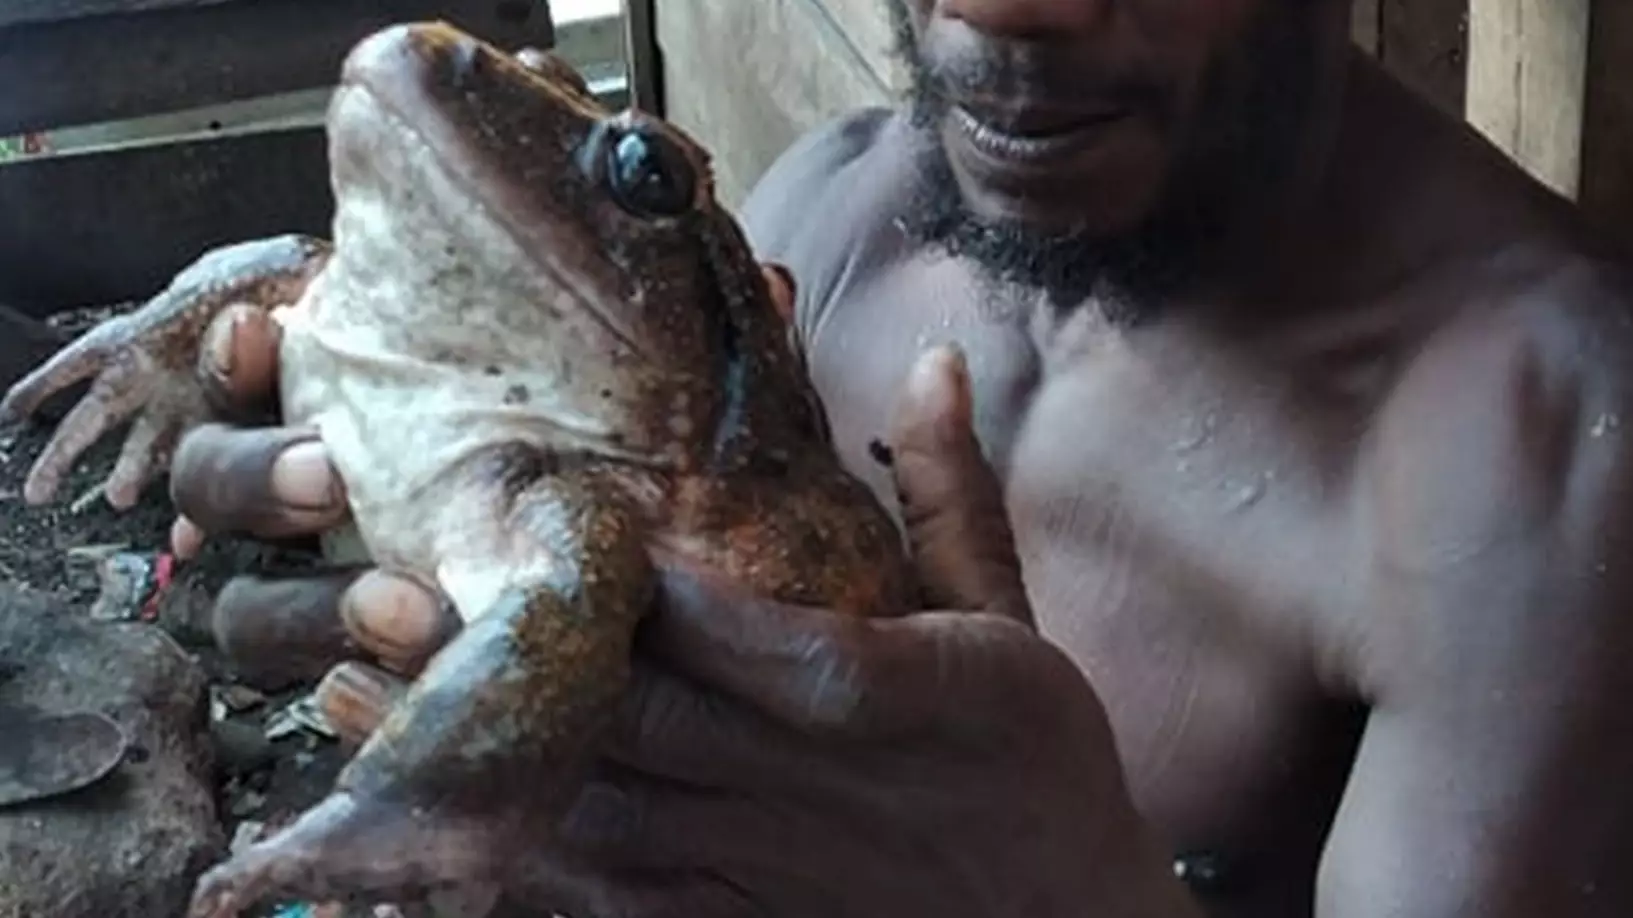 Villagers Stunned After Discovering Enormous Frog 'As Big As Human Baby'